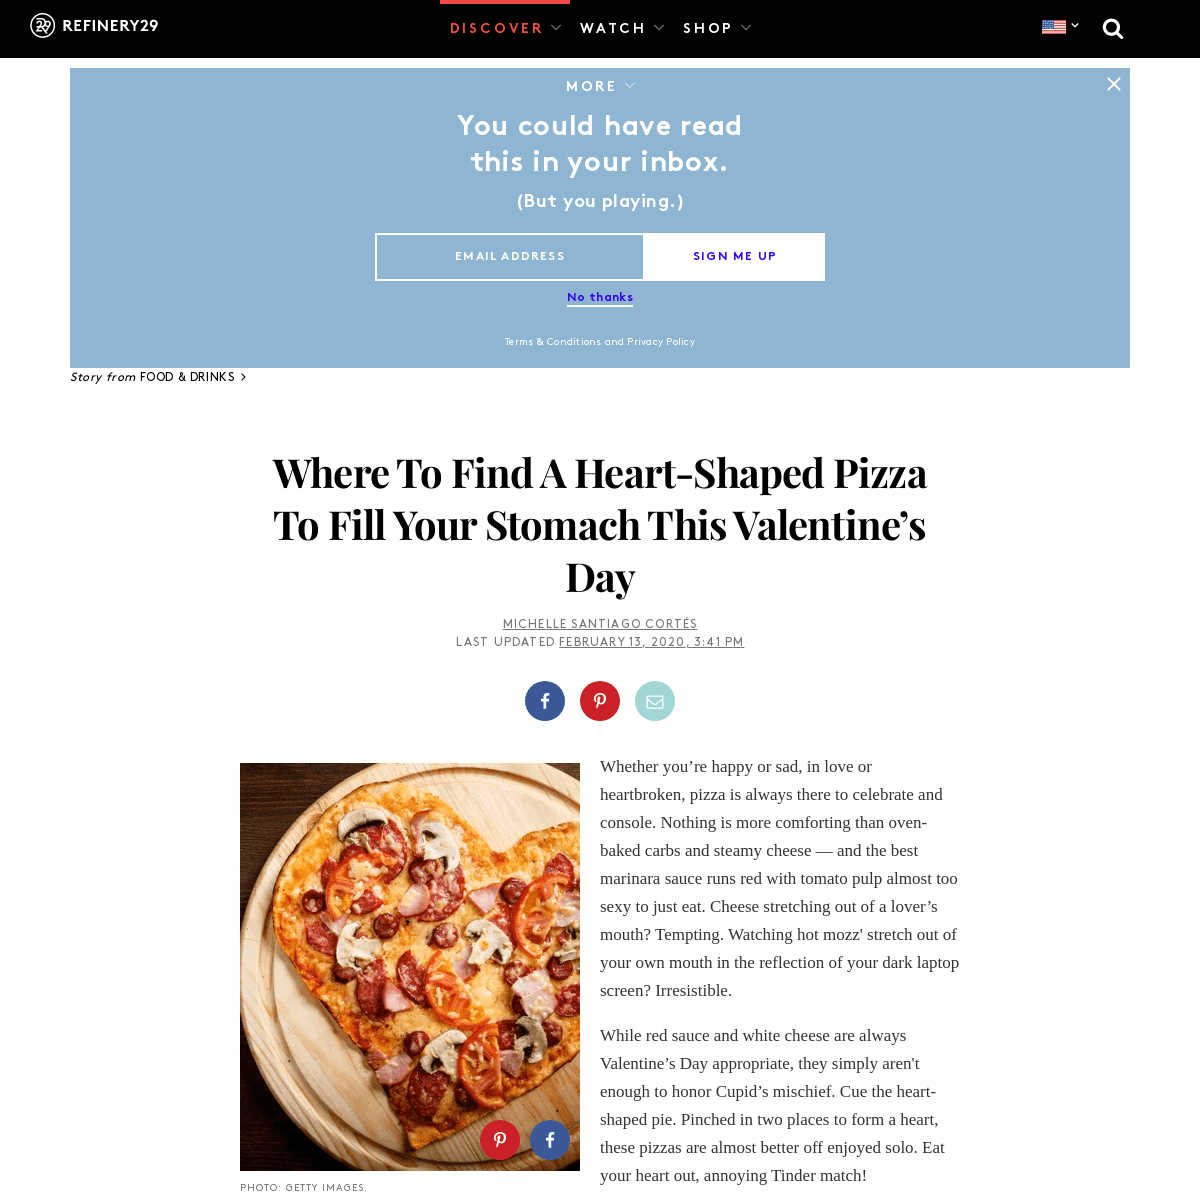 Where To Get Heart-Shaped Pizza For Valentines Day 2020